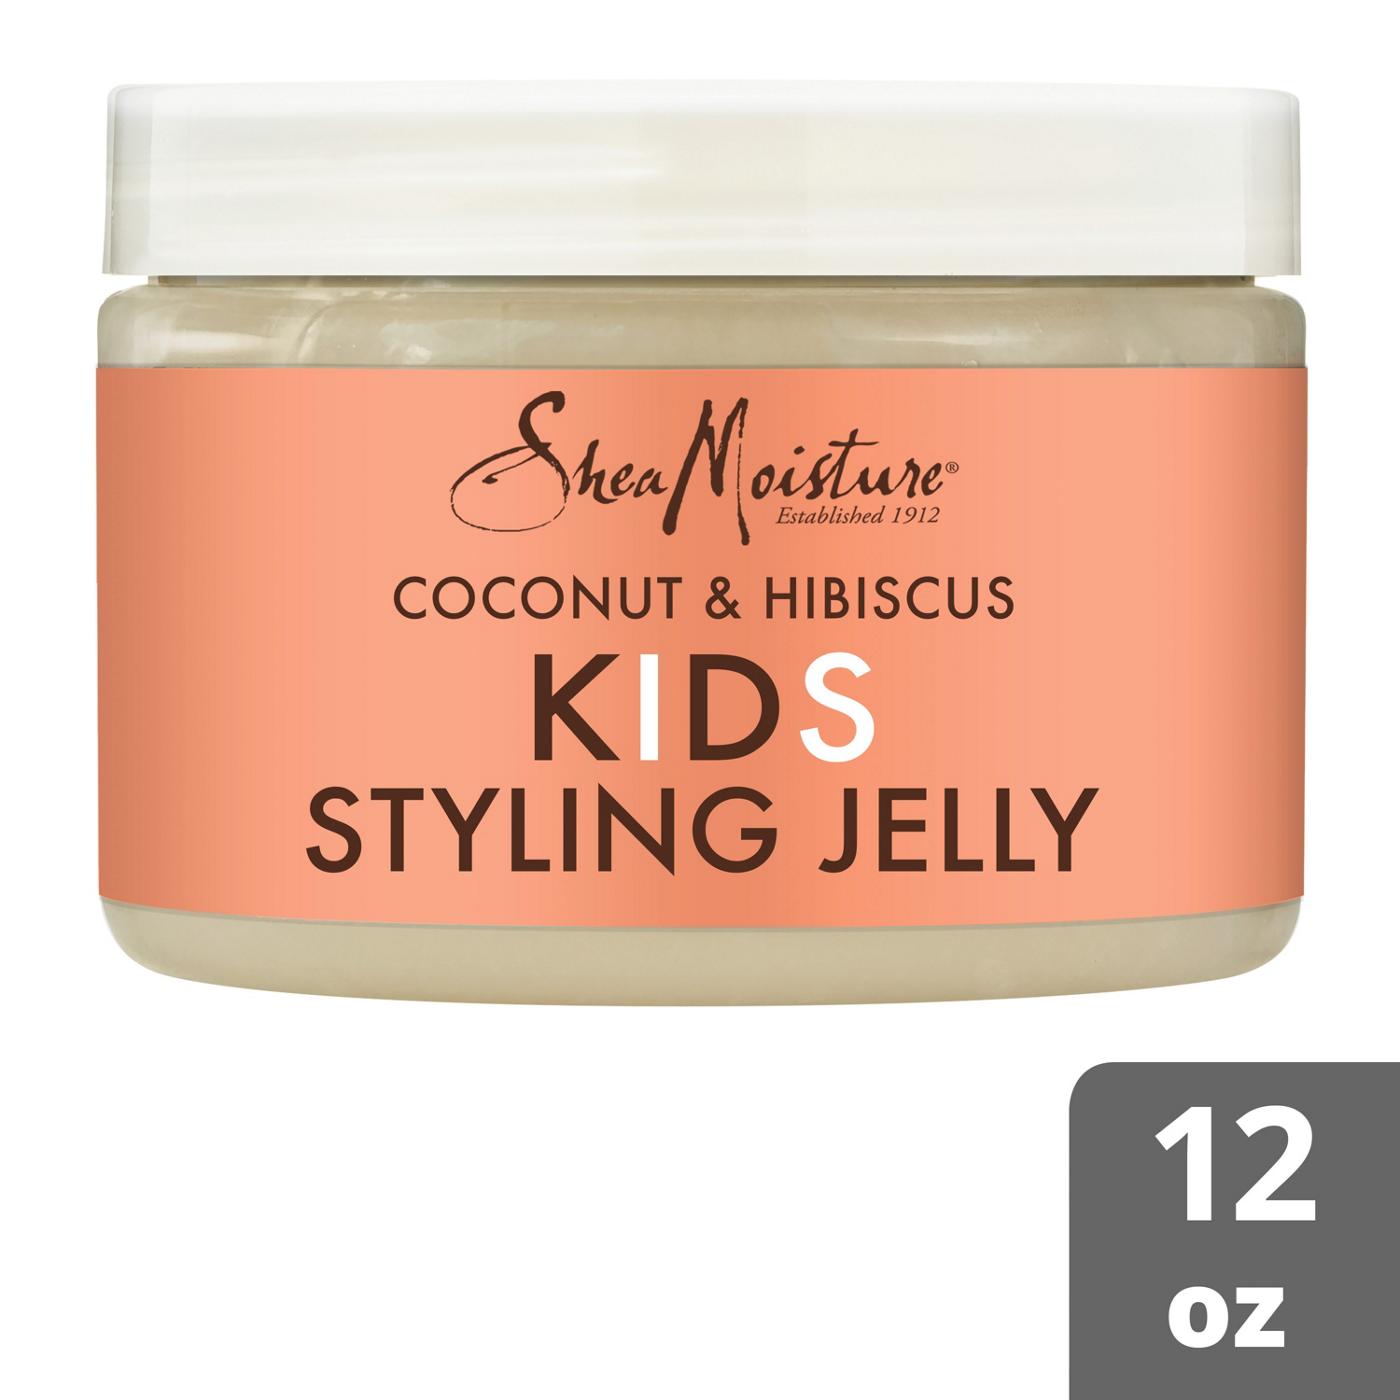 SheaMoisture Kids Styling Jelly - Coconut & Hibiscus; image 6 of 7